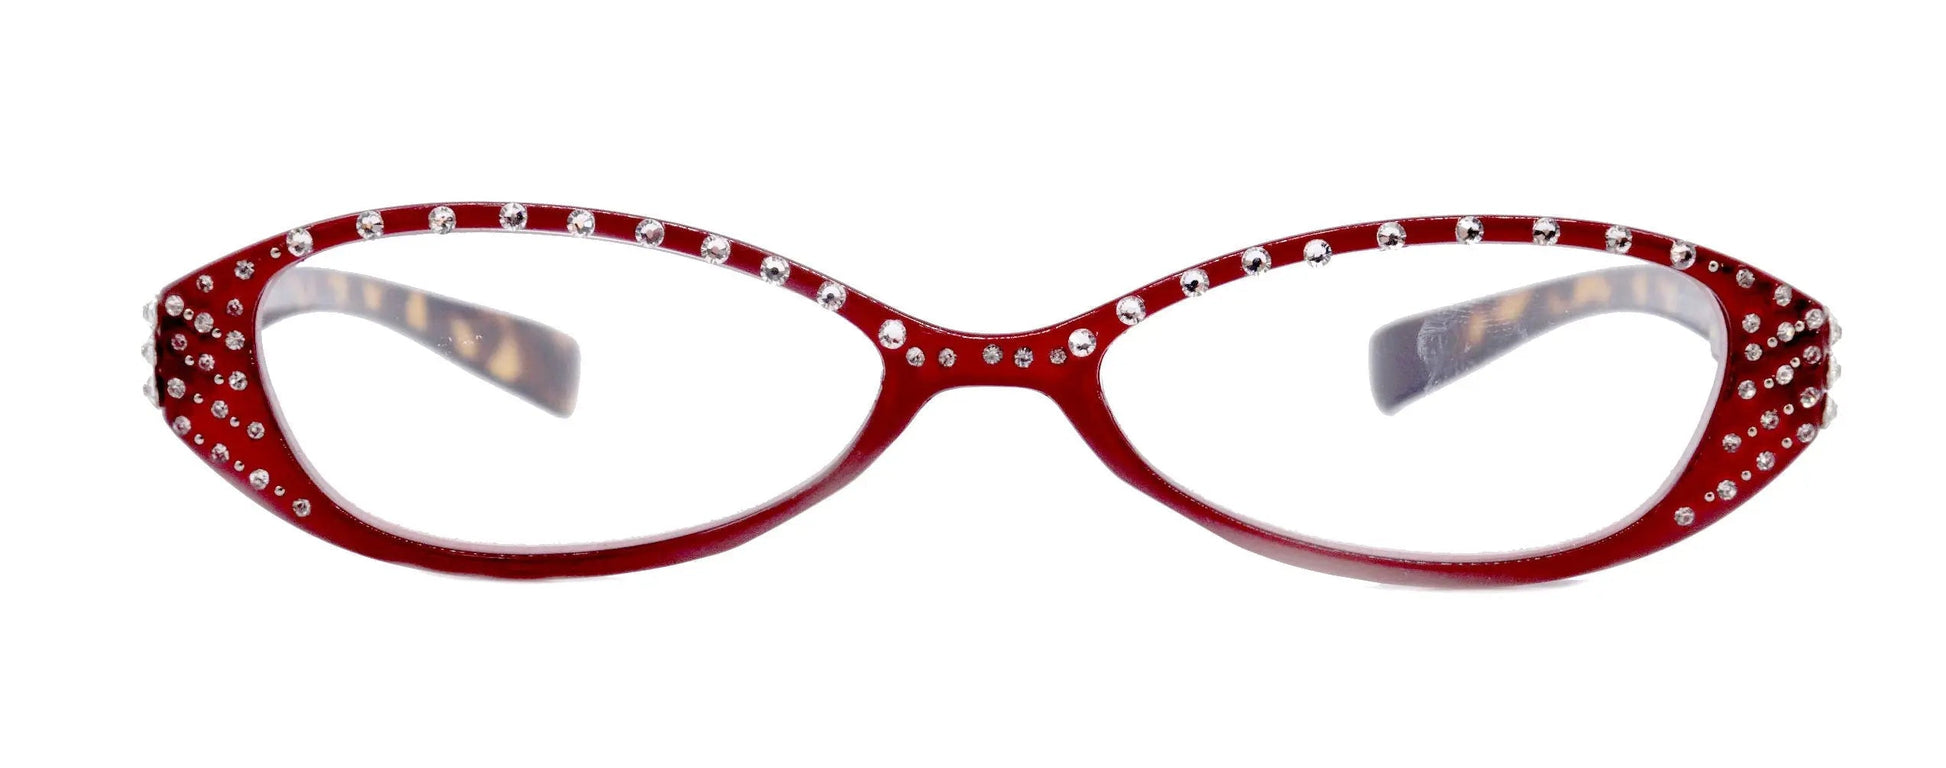 Lucky, (Bling) Women Reading Glasses W (Clear) Genuine European Crystals, Magnifying, Cat Eyes (Red, Tortoise Shell) Cat eye NY Fifth Avenue 